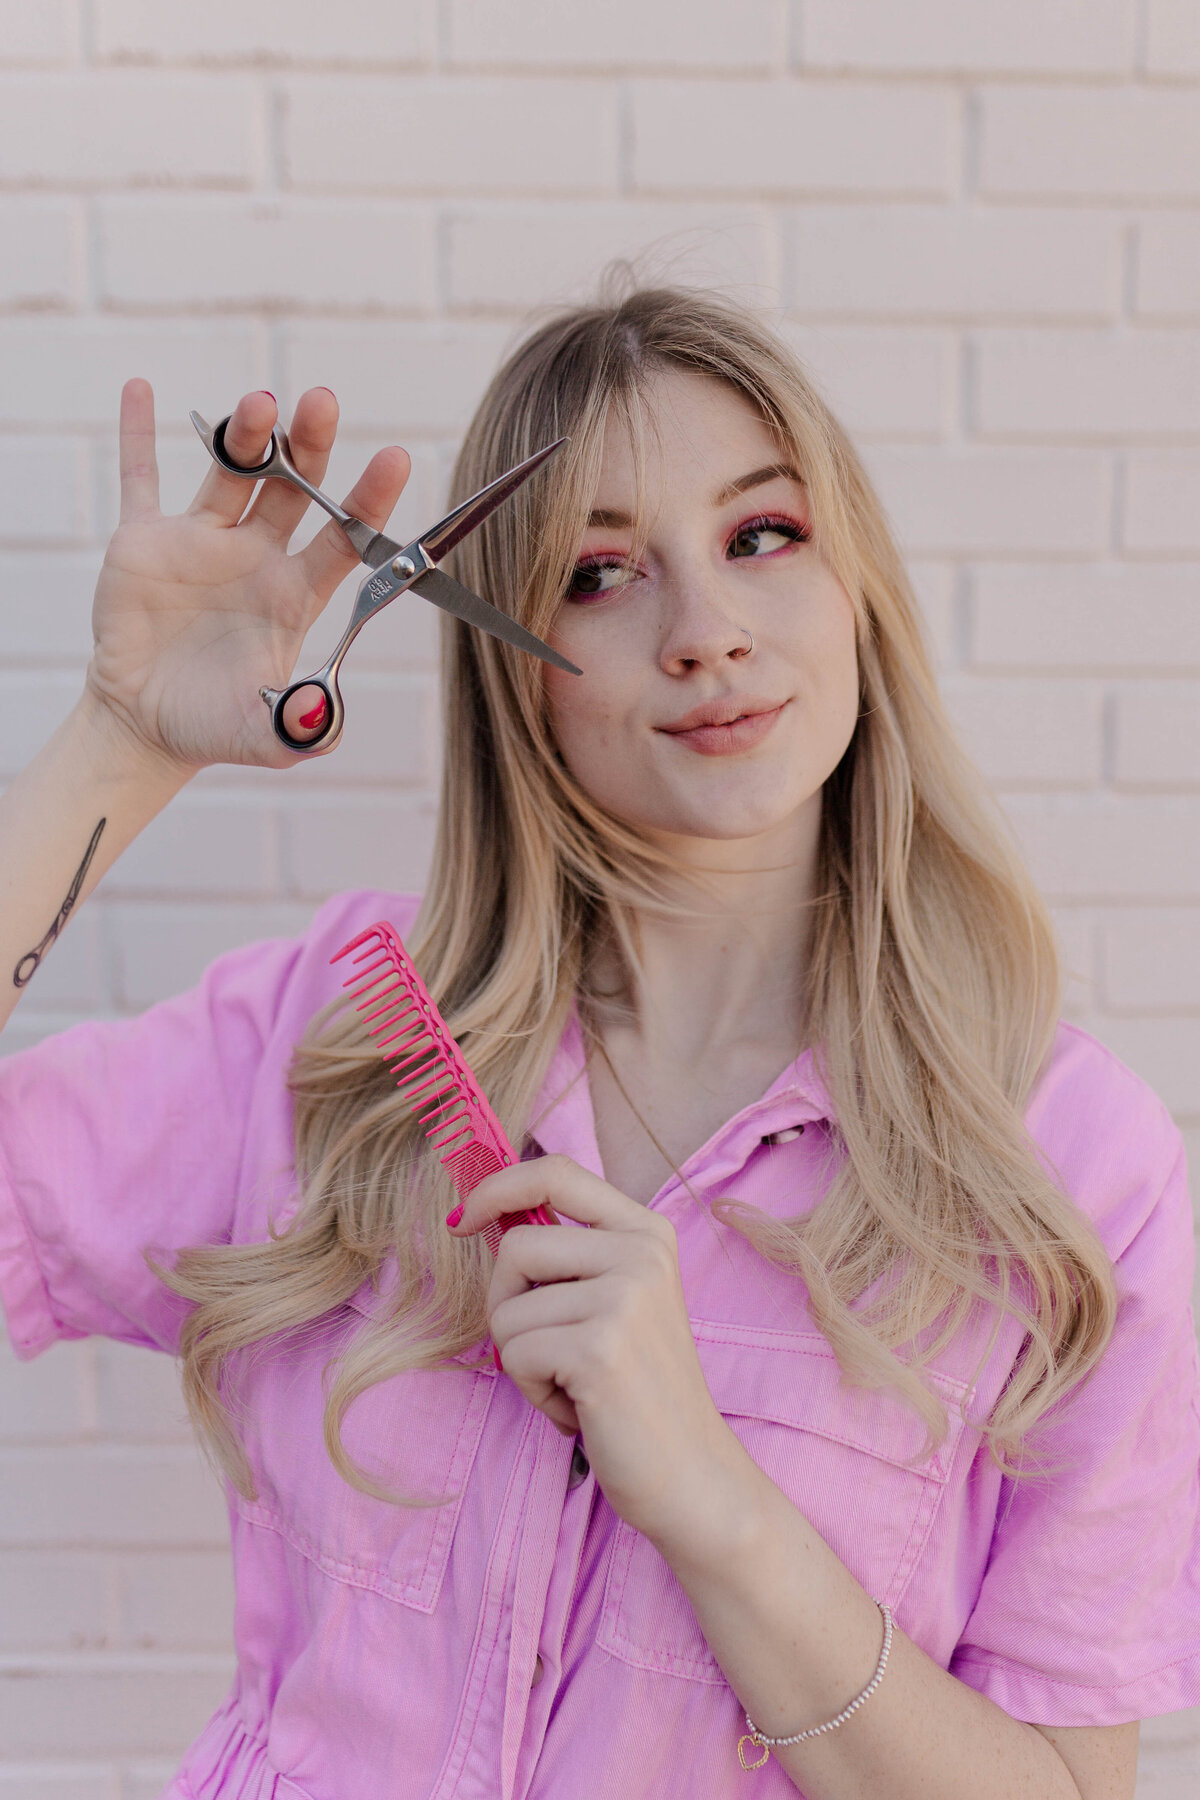 Branding photo for a hairdresser posing with shears and a comb wearing all pink in front of a white brick wall